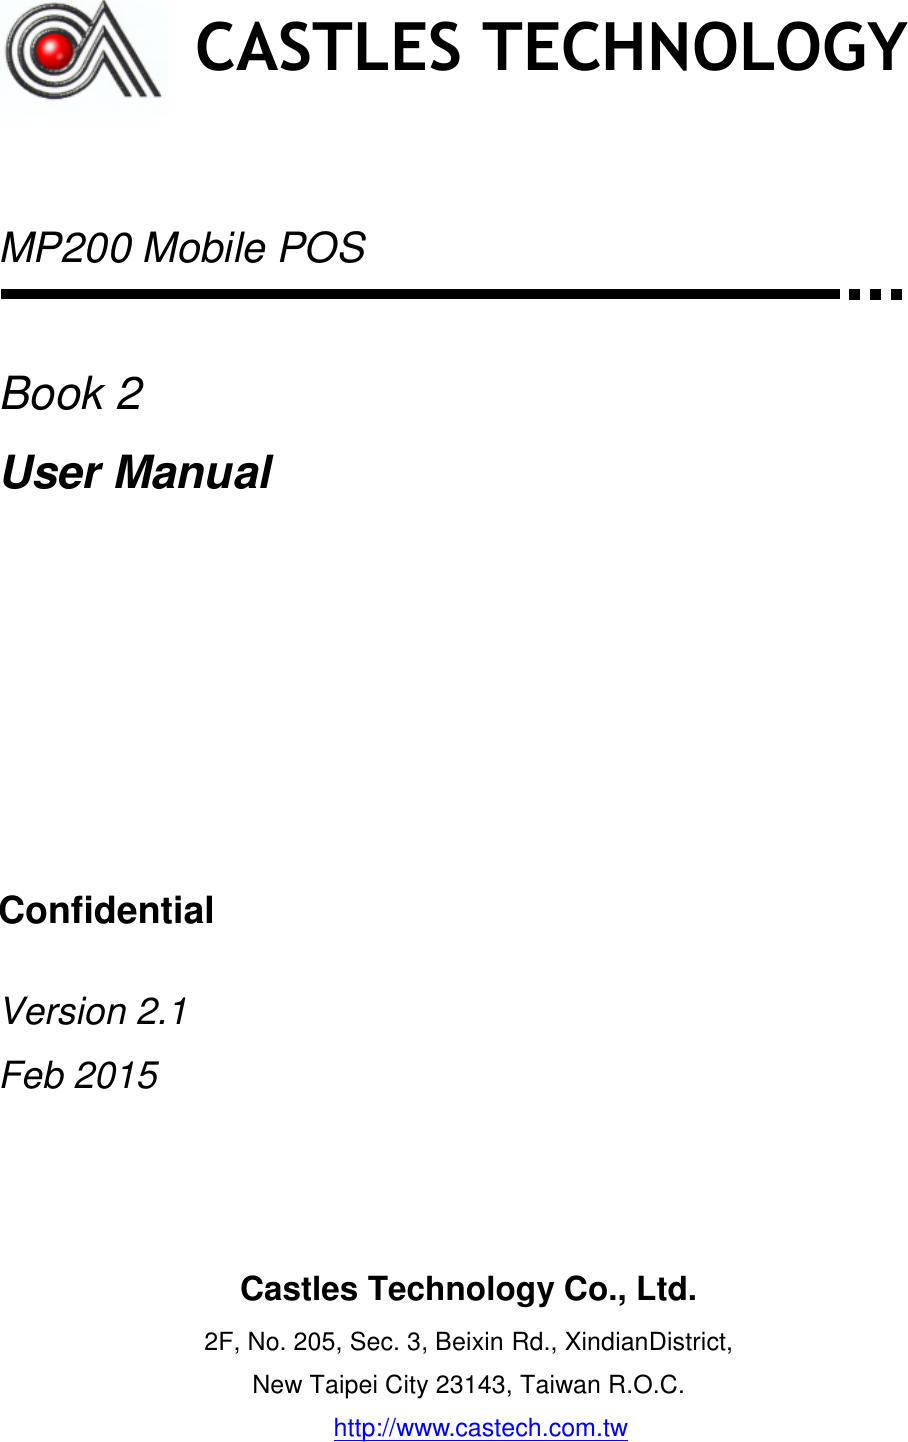     MP200 Mobile POS   Book 2 User Manual       Confidential  Version 2.1 Feb 2015      CASTLES TECHNOLOGY Castles Technology Co., Ltd. 2F, No. 205, Sec. 3, Beixin Rd., XindianDistrict, New Taipei City 23143, Taiwan R.O.C. http://www.castech.com.tw  